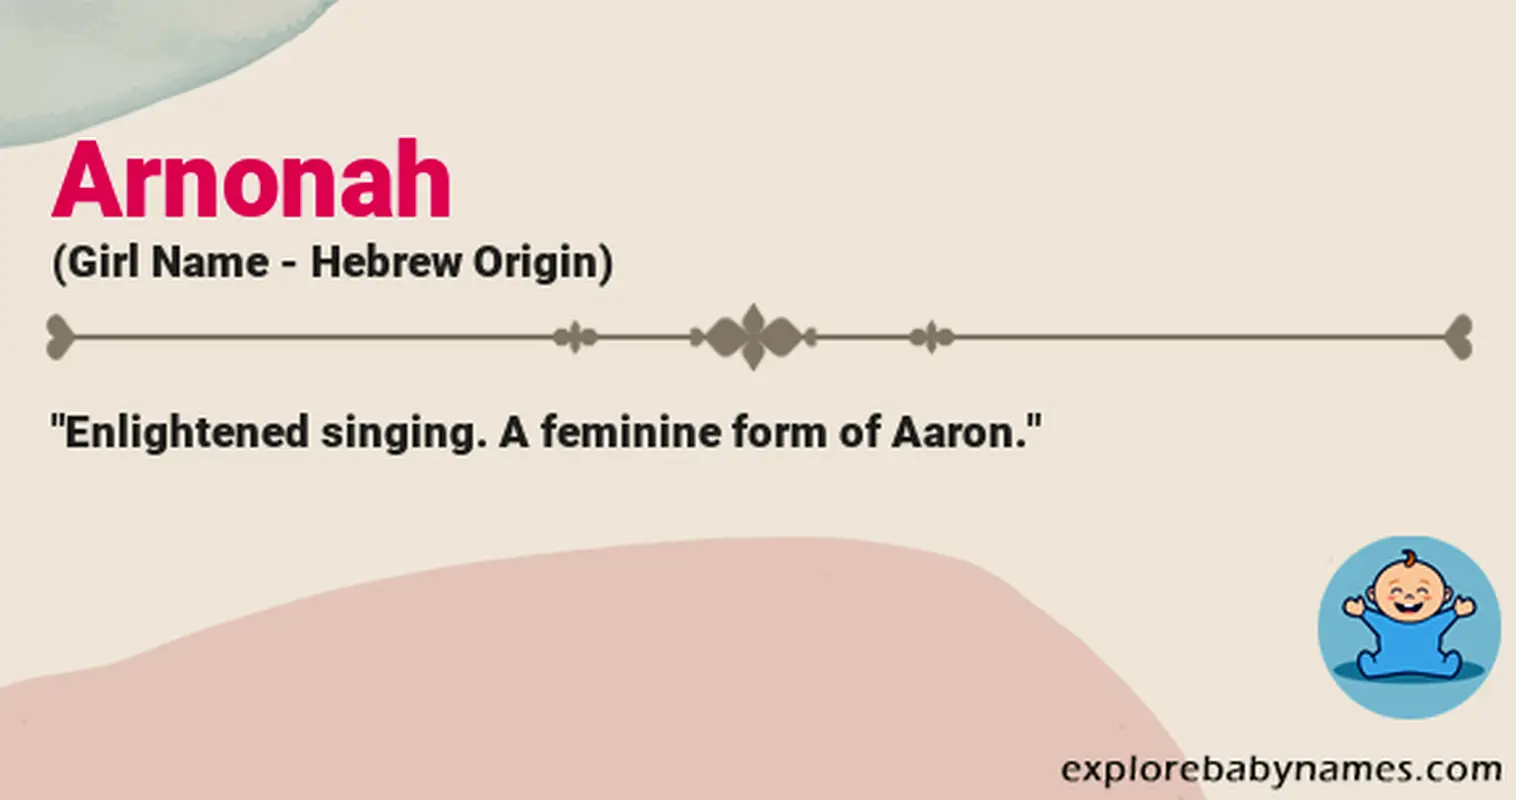 Meaning of Arnonah